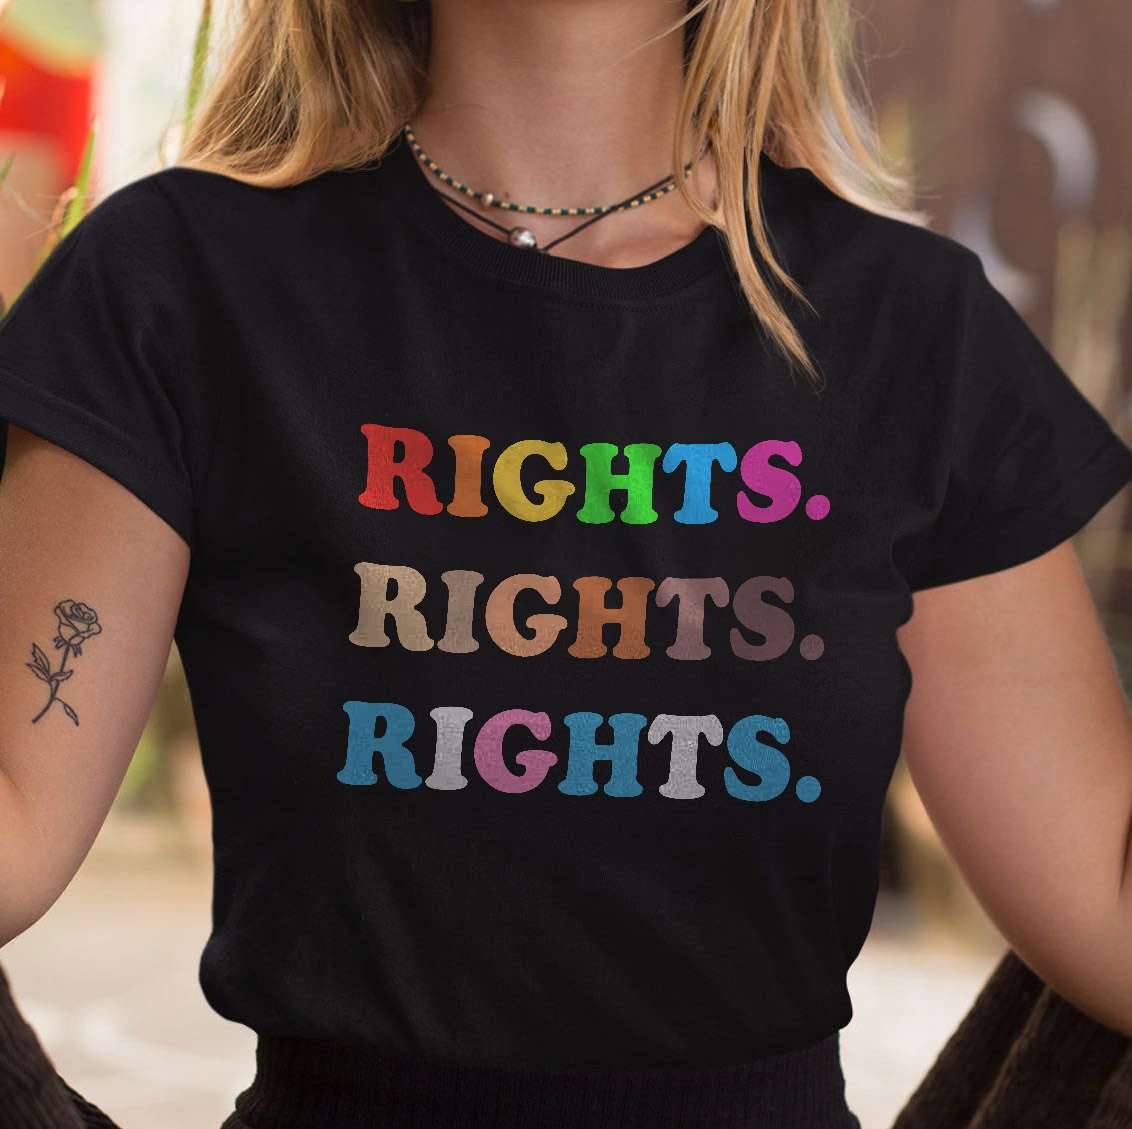 Rights rights rights - Equal right for everyone, lgbt and black community